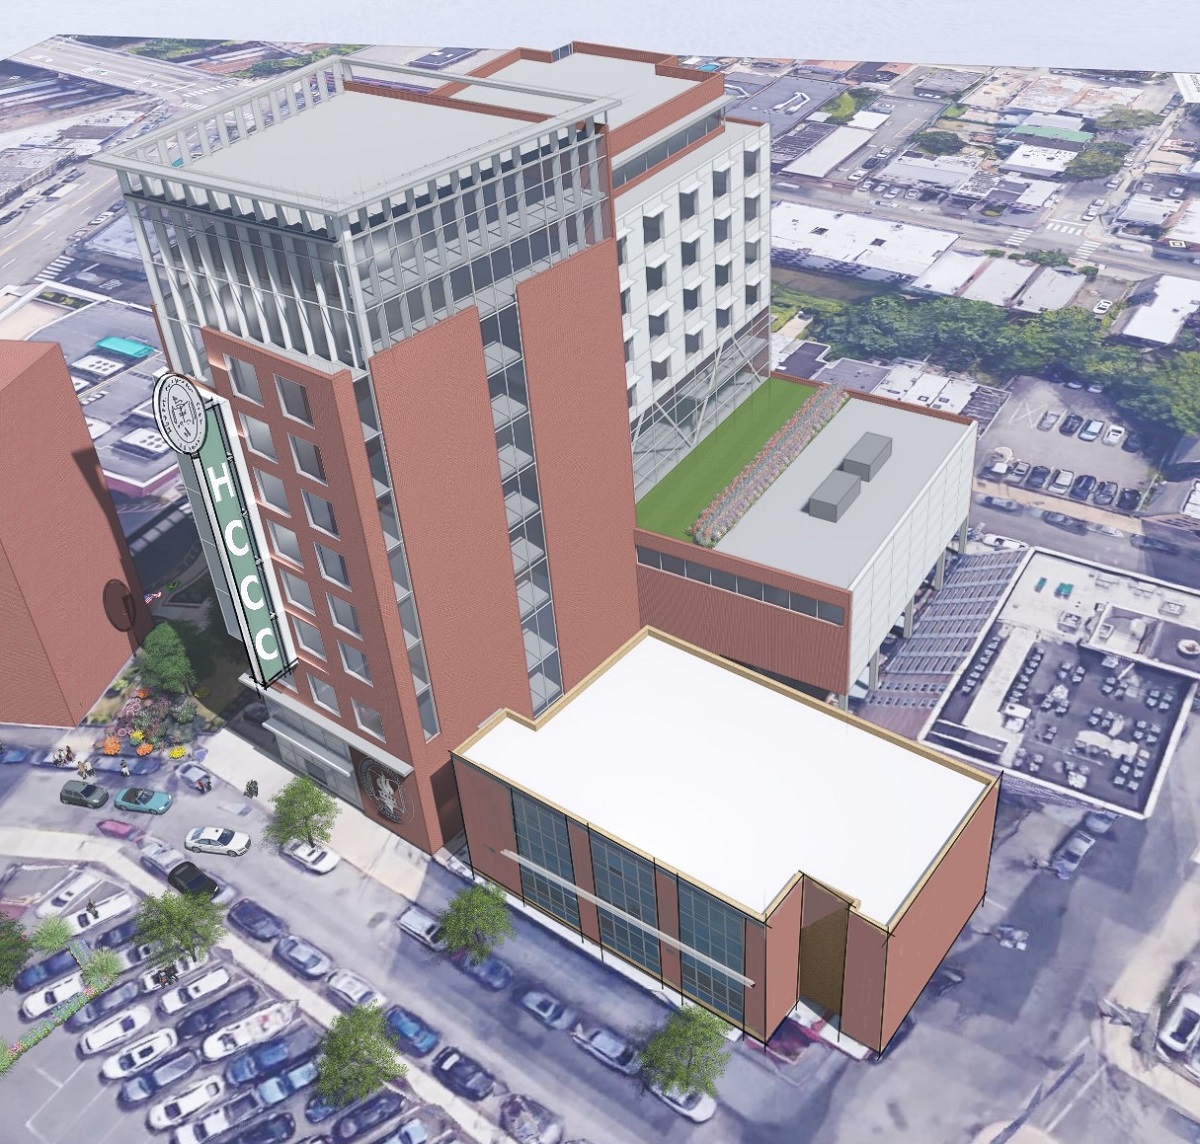 Pictured here, an aerial-view rendering of Hudson County Community College’s 11-story, 153,186 square-foot academic tower facility that will be constructed in the Journal Square section of Jersey City, NJ.